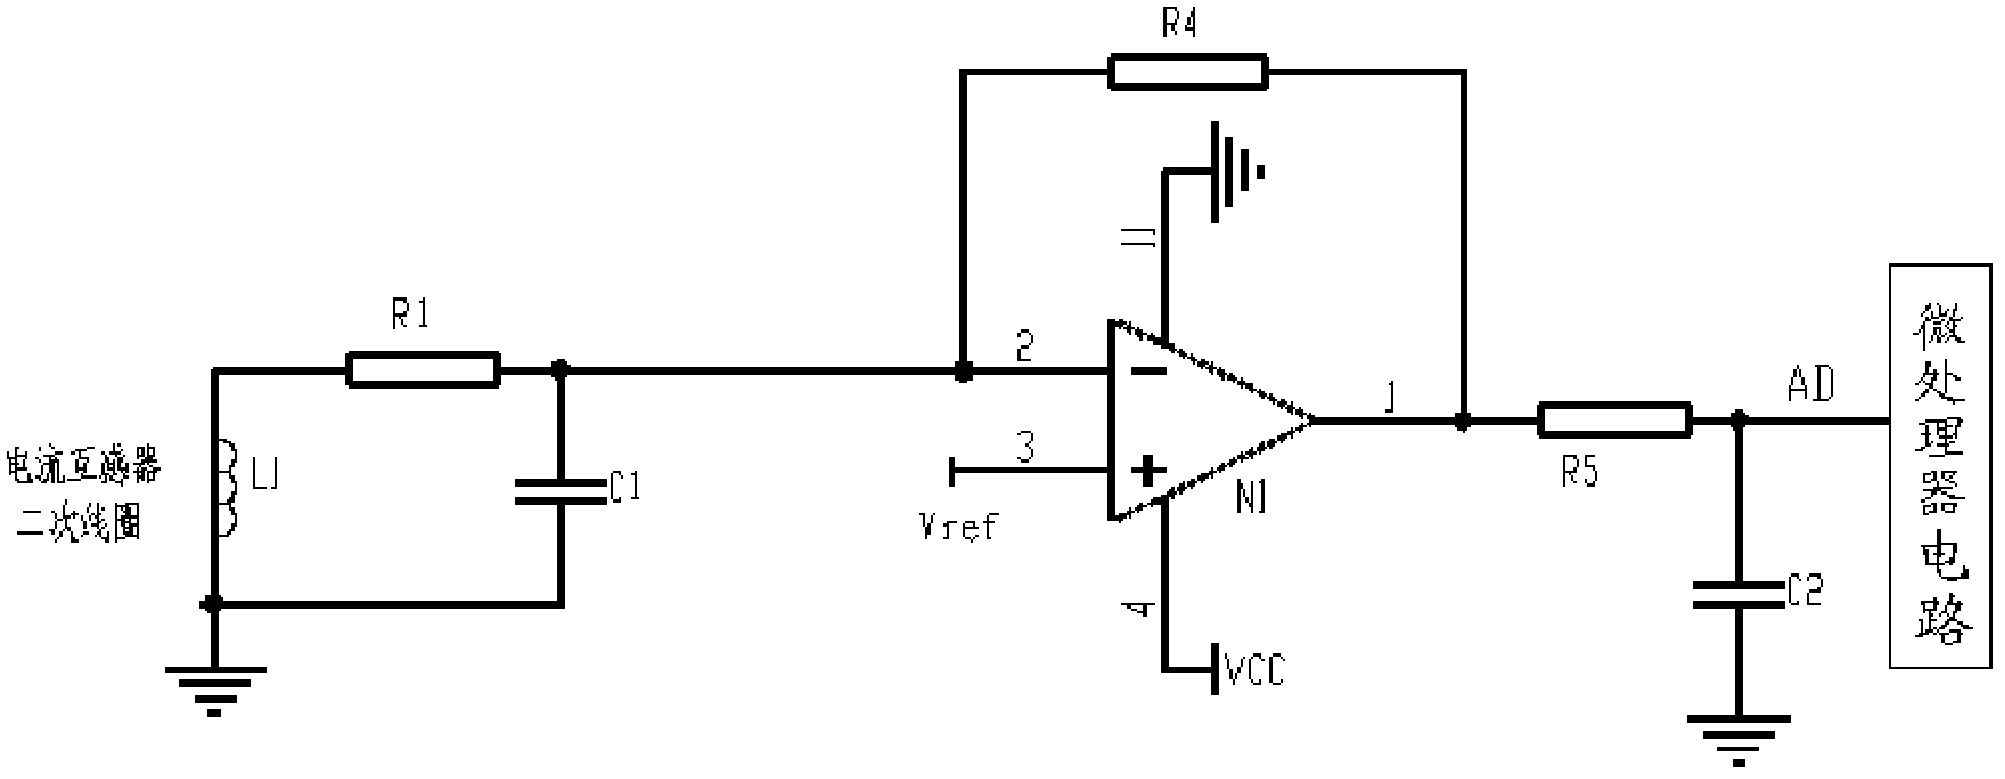 Detection circuit for monitoring state of current transformer